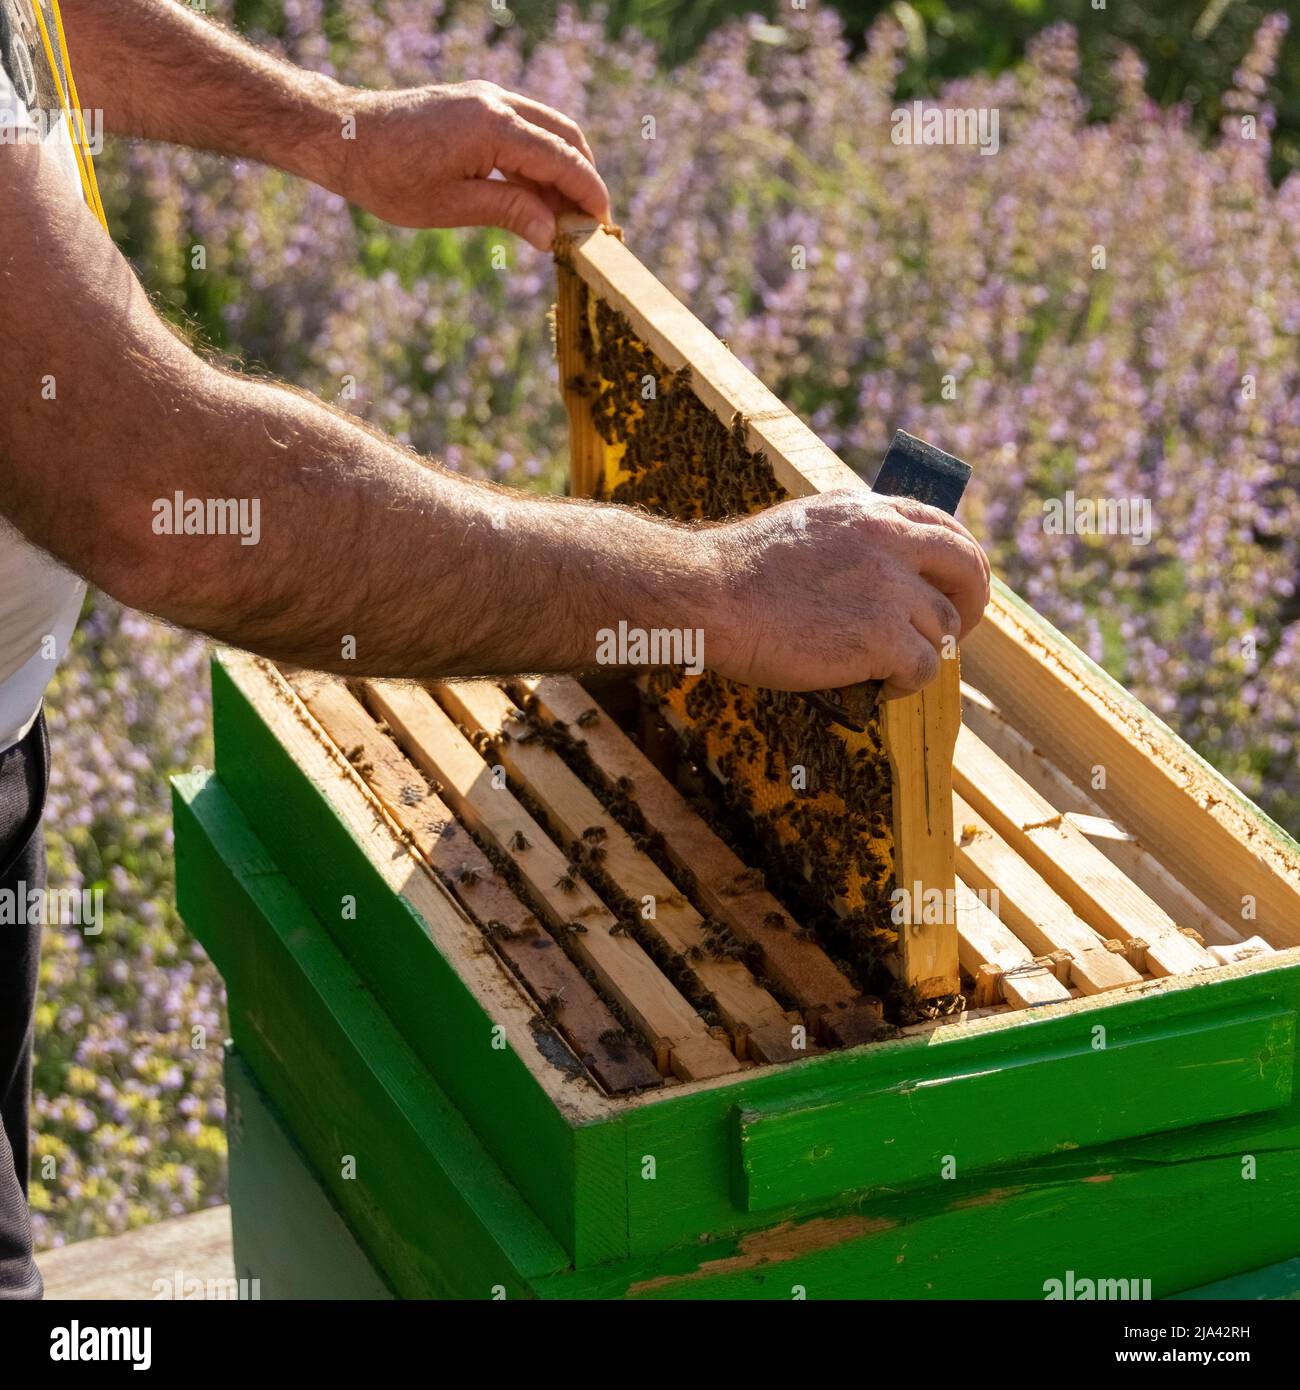 Apiculture, working with the bees, agricultural activities Stock Photo